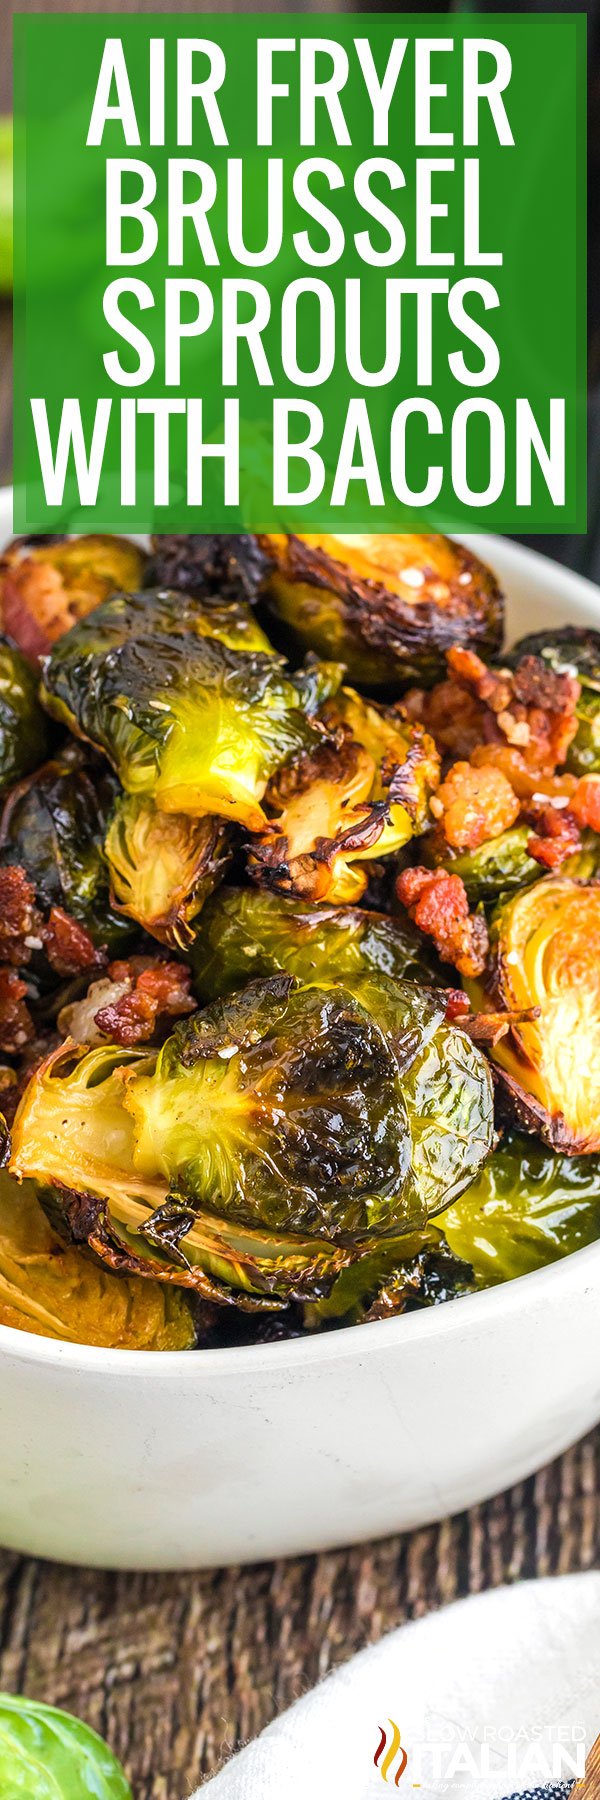 air fryer brussel sprouts with bacon.